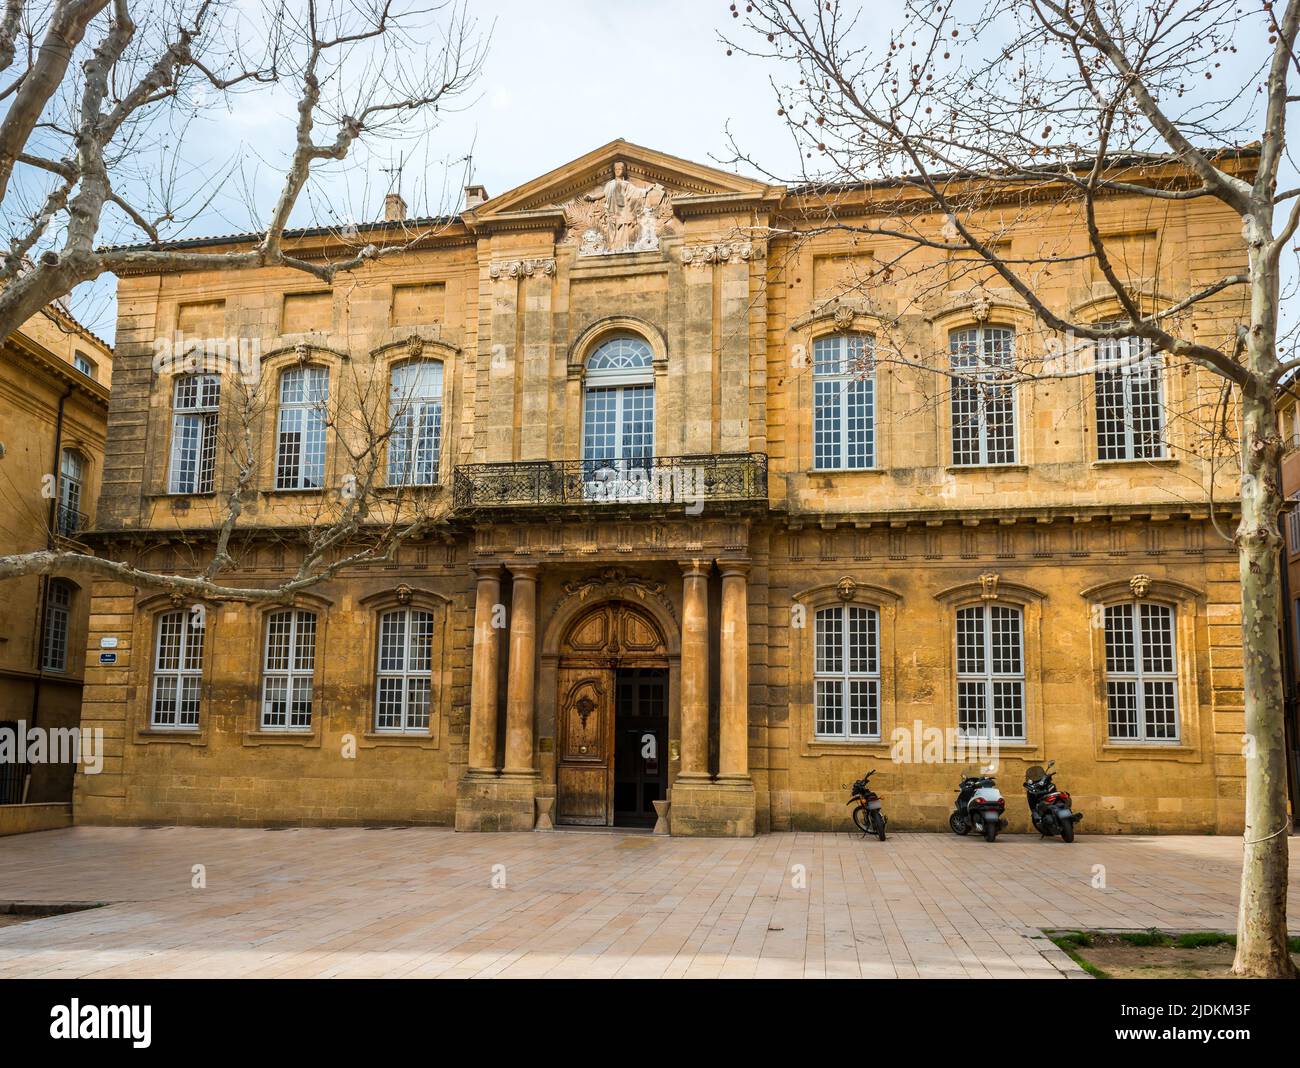 Typical old building in Aix en Provence, in the Bouches du Rhone, Provence, France Stock Photo